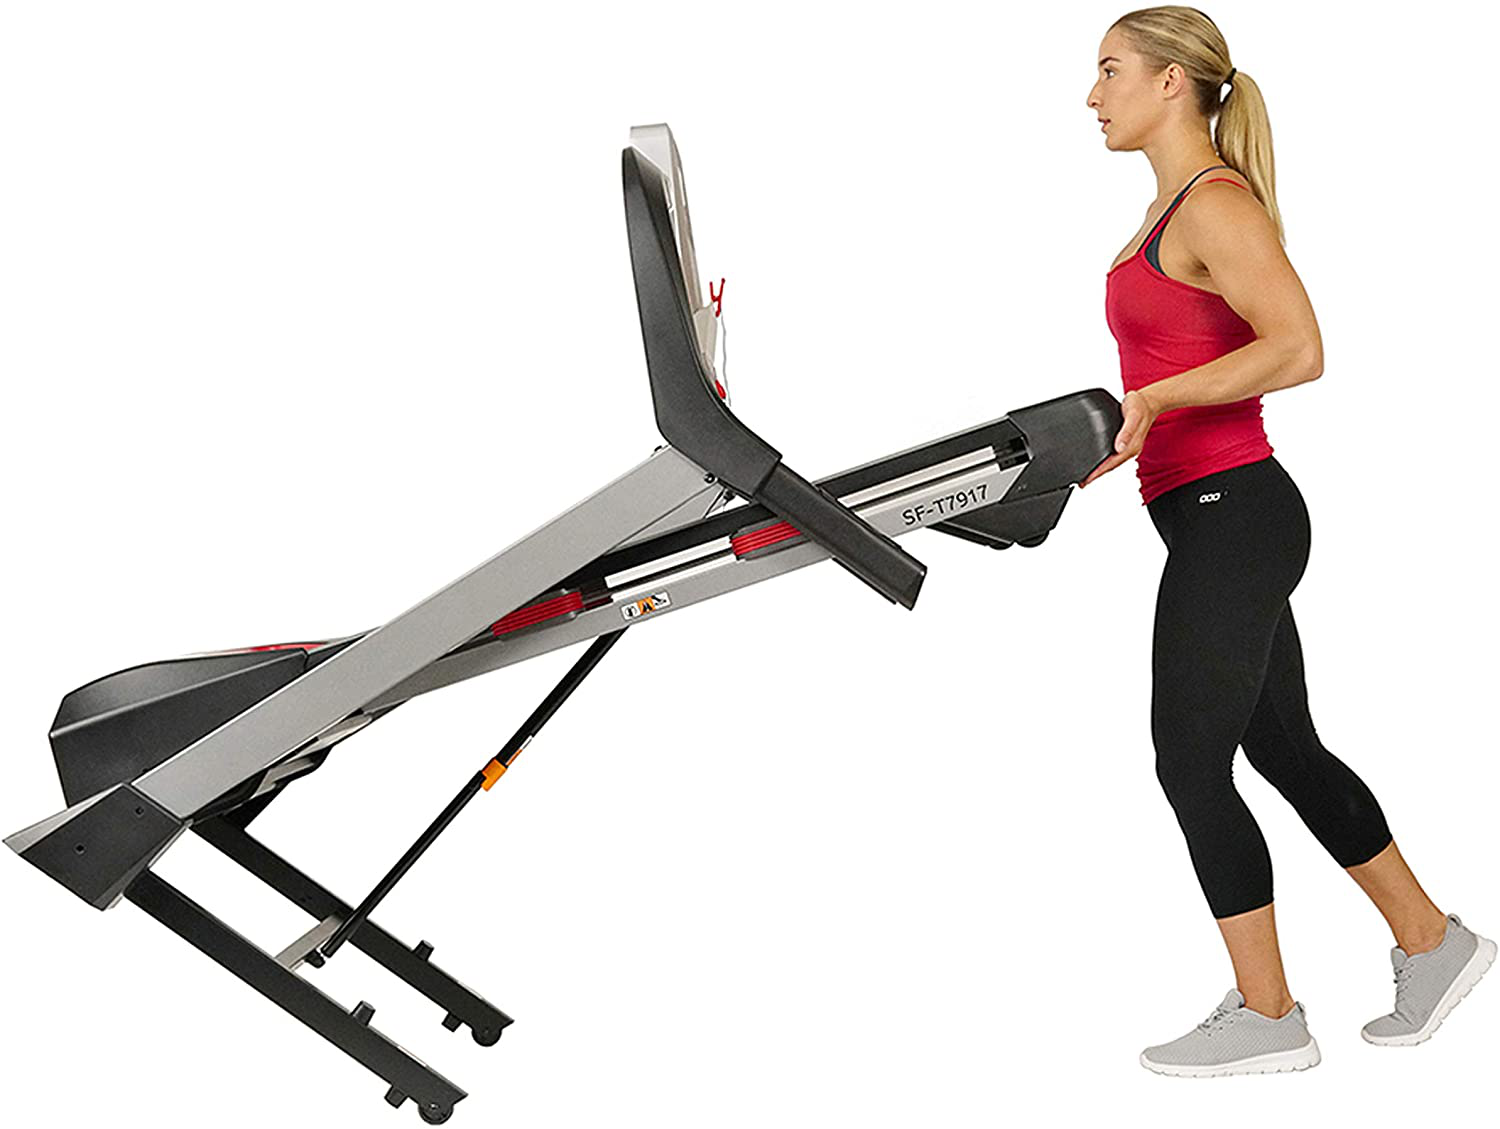 Sunny Health & Fitness Folding Treadmill for Home Exercise with 265 LB Capacity, Device Holder, Bluetooth Speakers and USB Charging - SF-T7917 Animals & Pet Supplies > Pet Supplies > Dog Supplies > Dog Treadmills Sunny Health & Fitness   